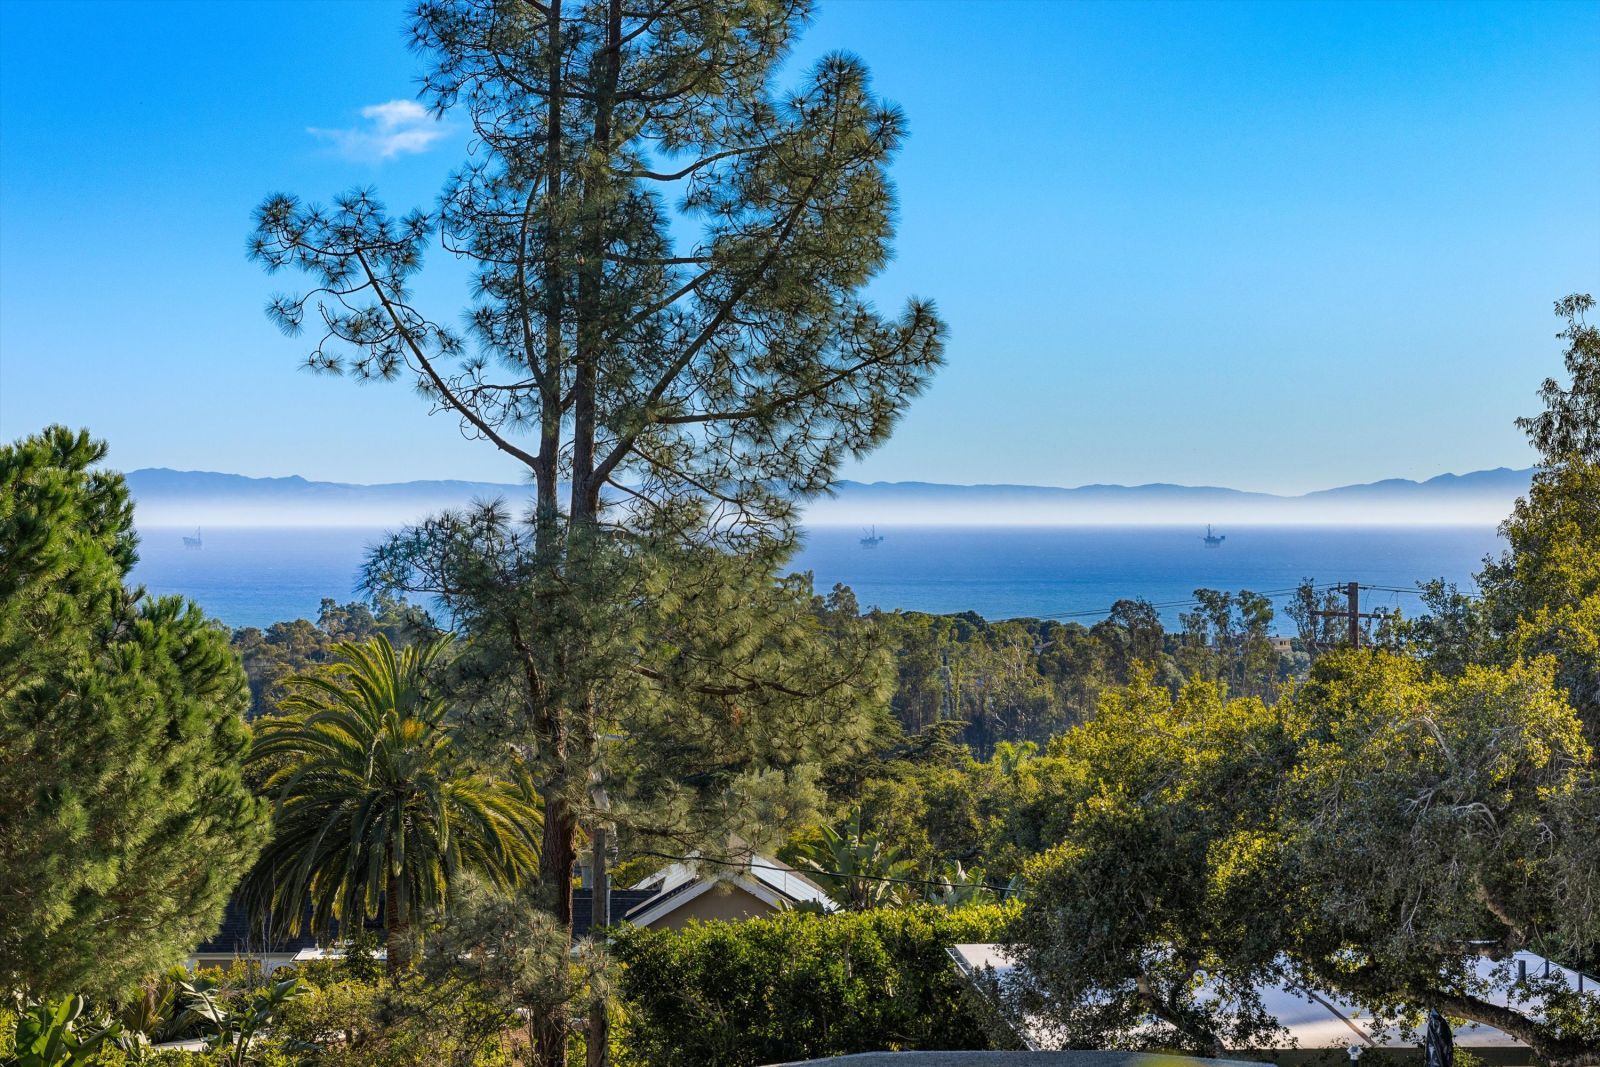 A tree stands tall in the foreground of this picture of the Santa Barbara coast with the Channel Islands in the distance.